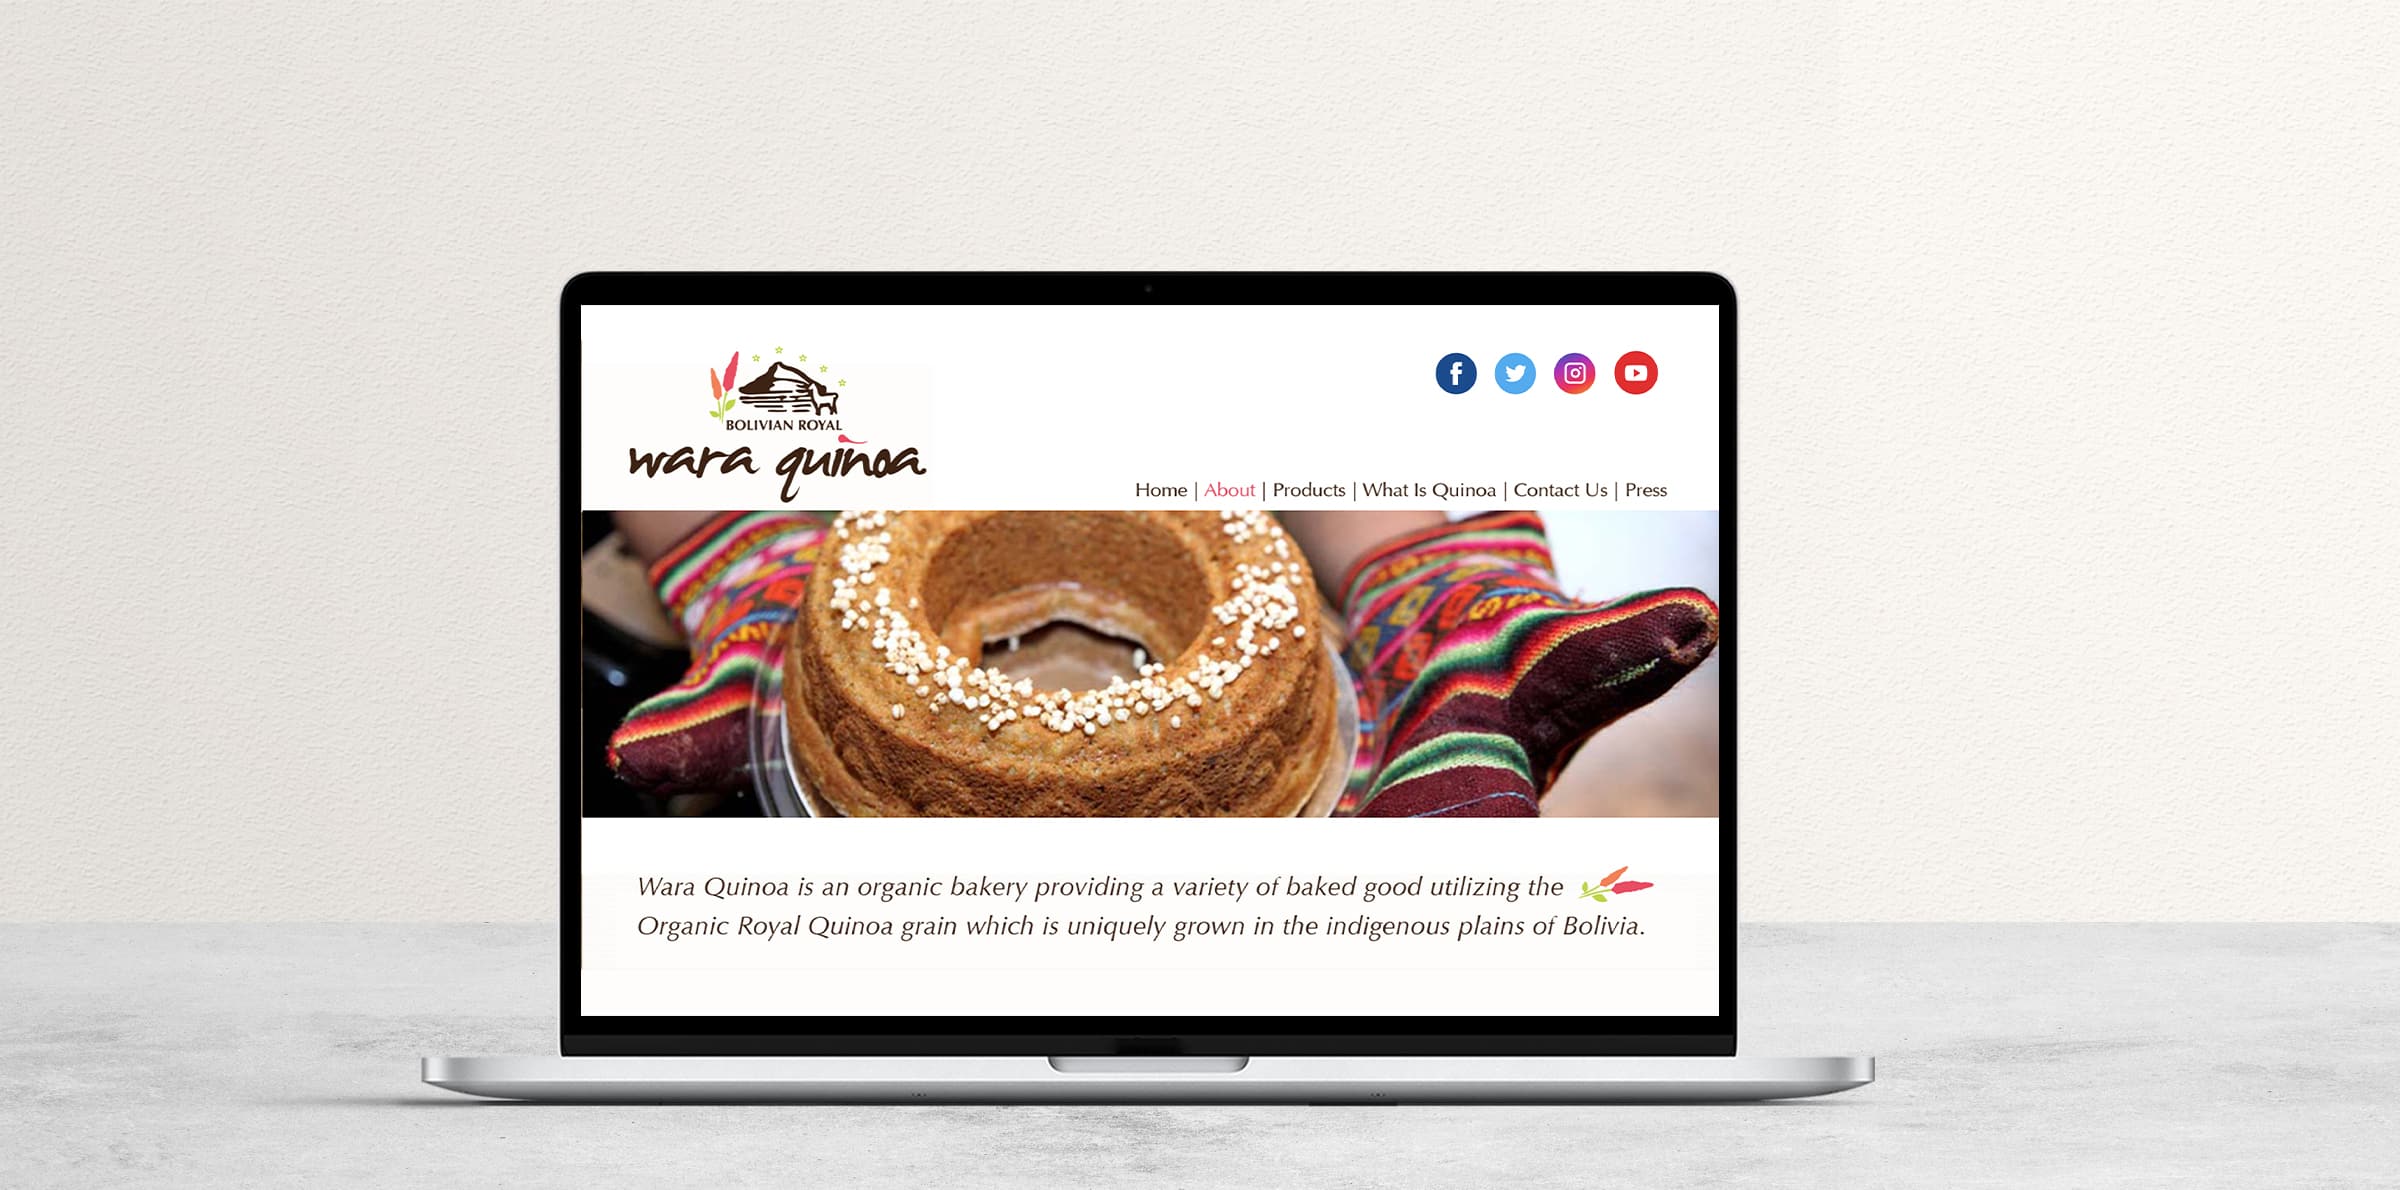 The aesthetic website design highlighting the origin of the brand and the natural, healthy process that goes into the creation of both the quinoa and the desserts themselves.